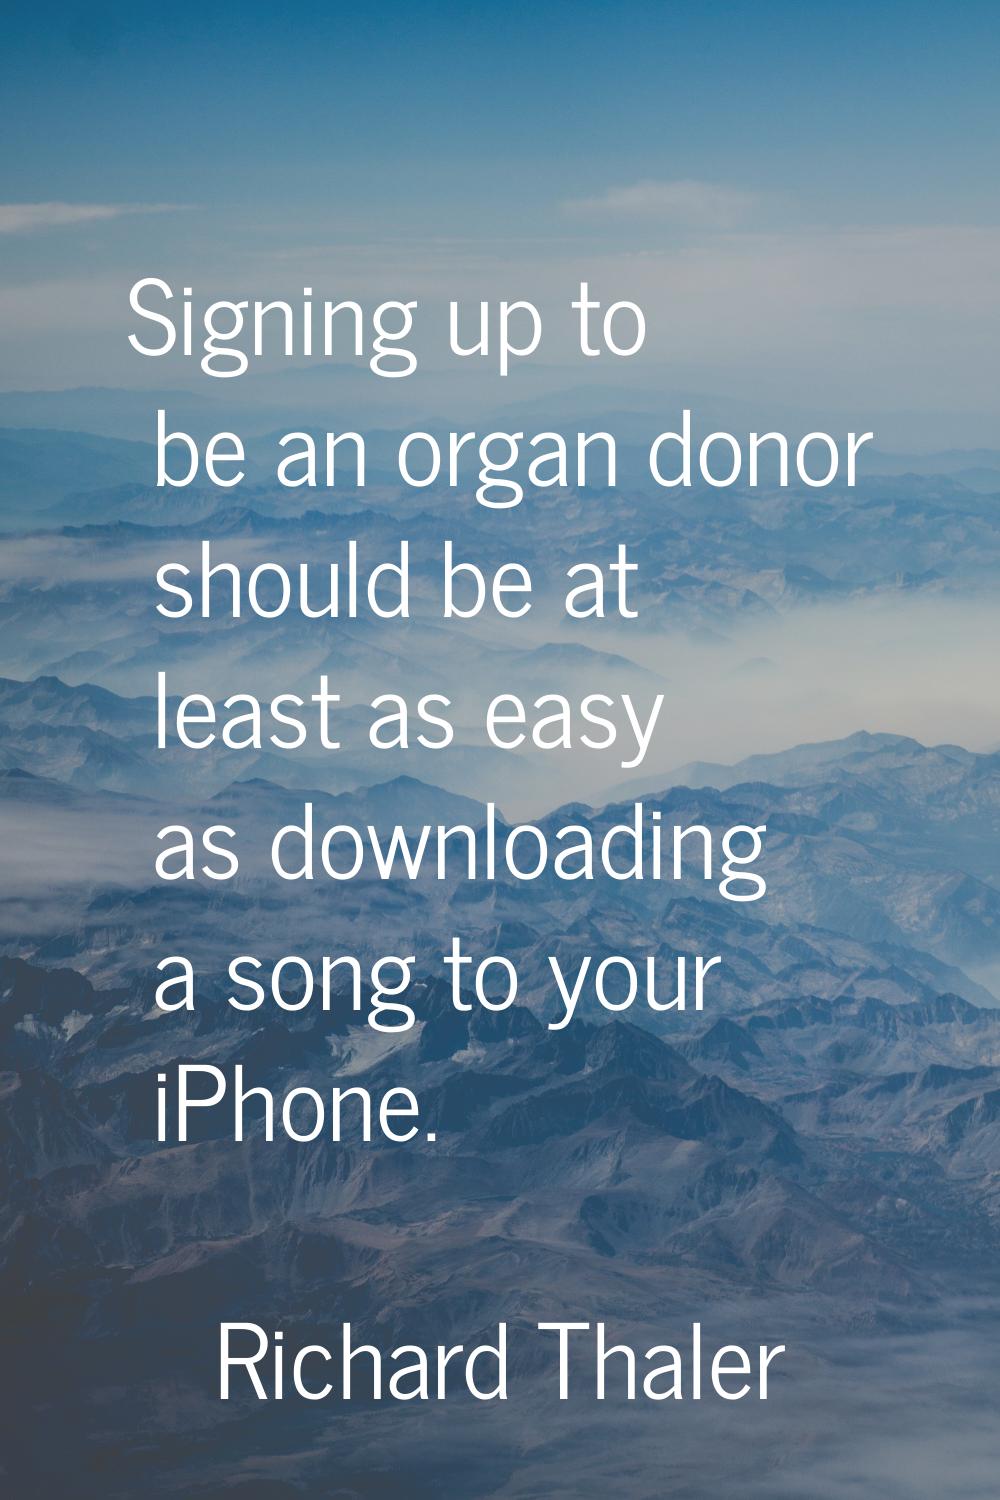 Signing up to be an organ donor should be at least as easy as downloading a song to your iPhone.